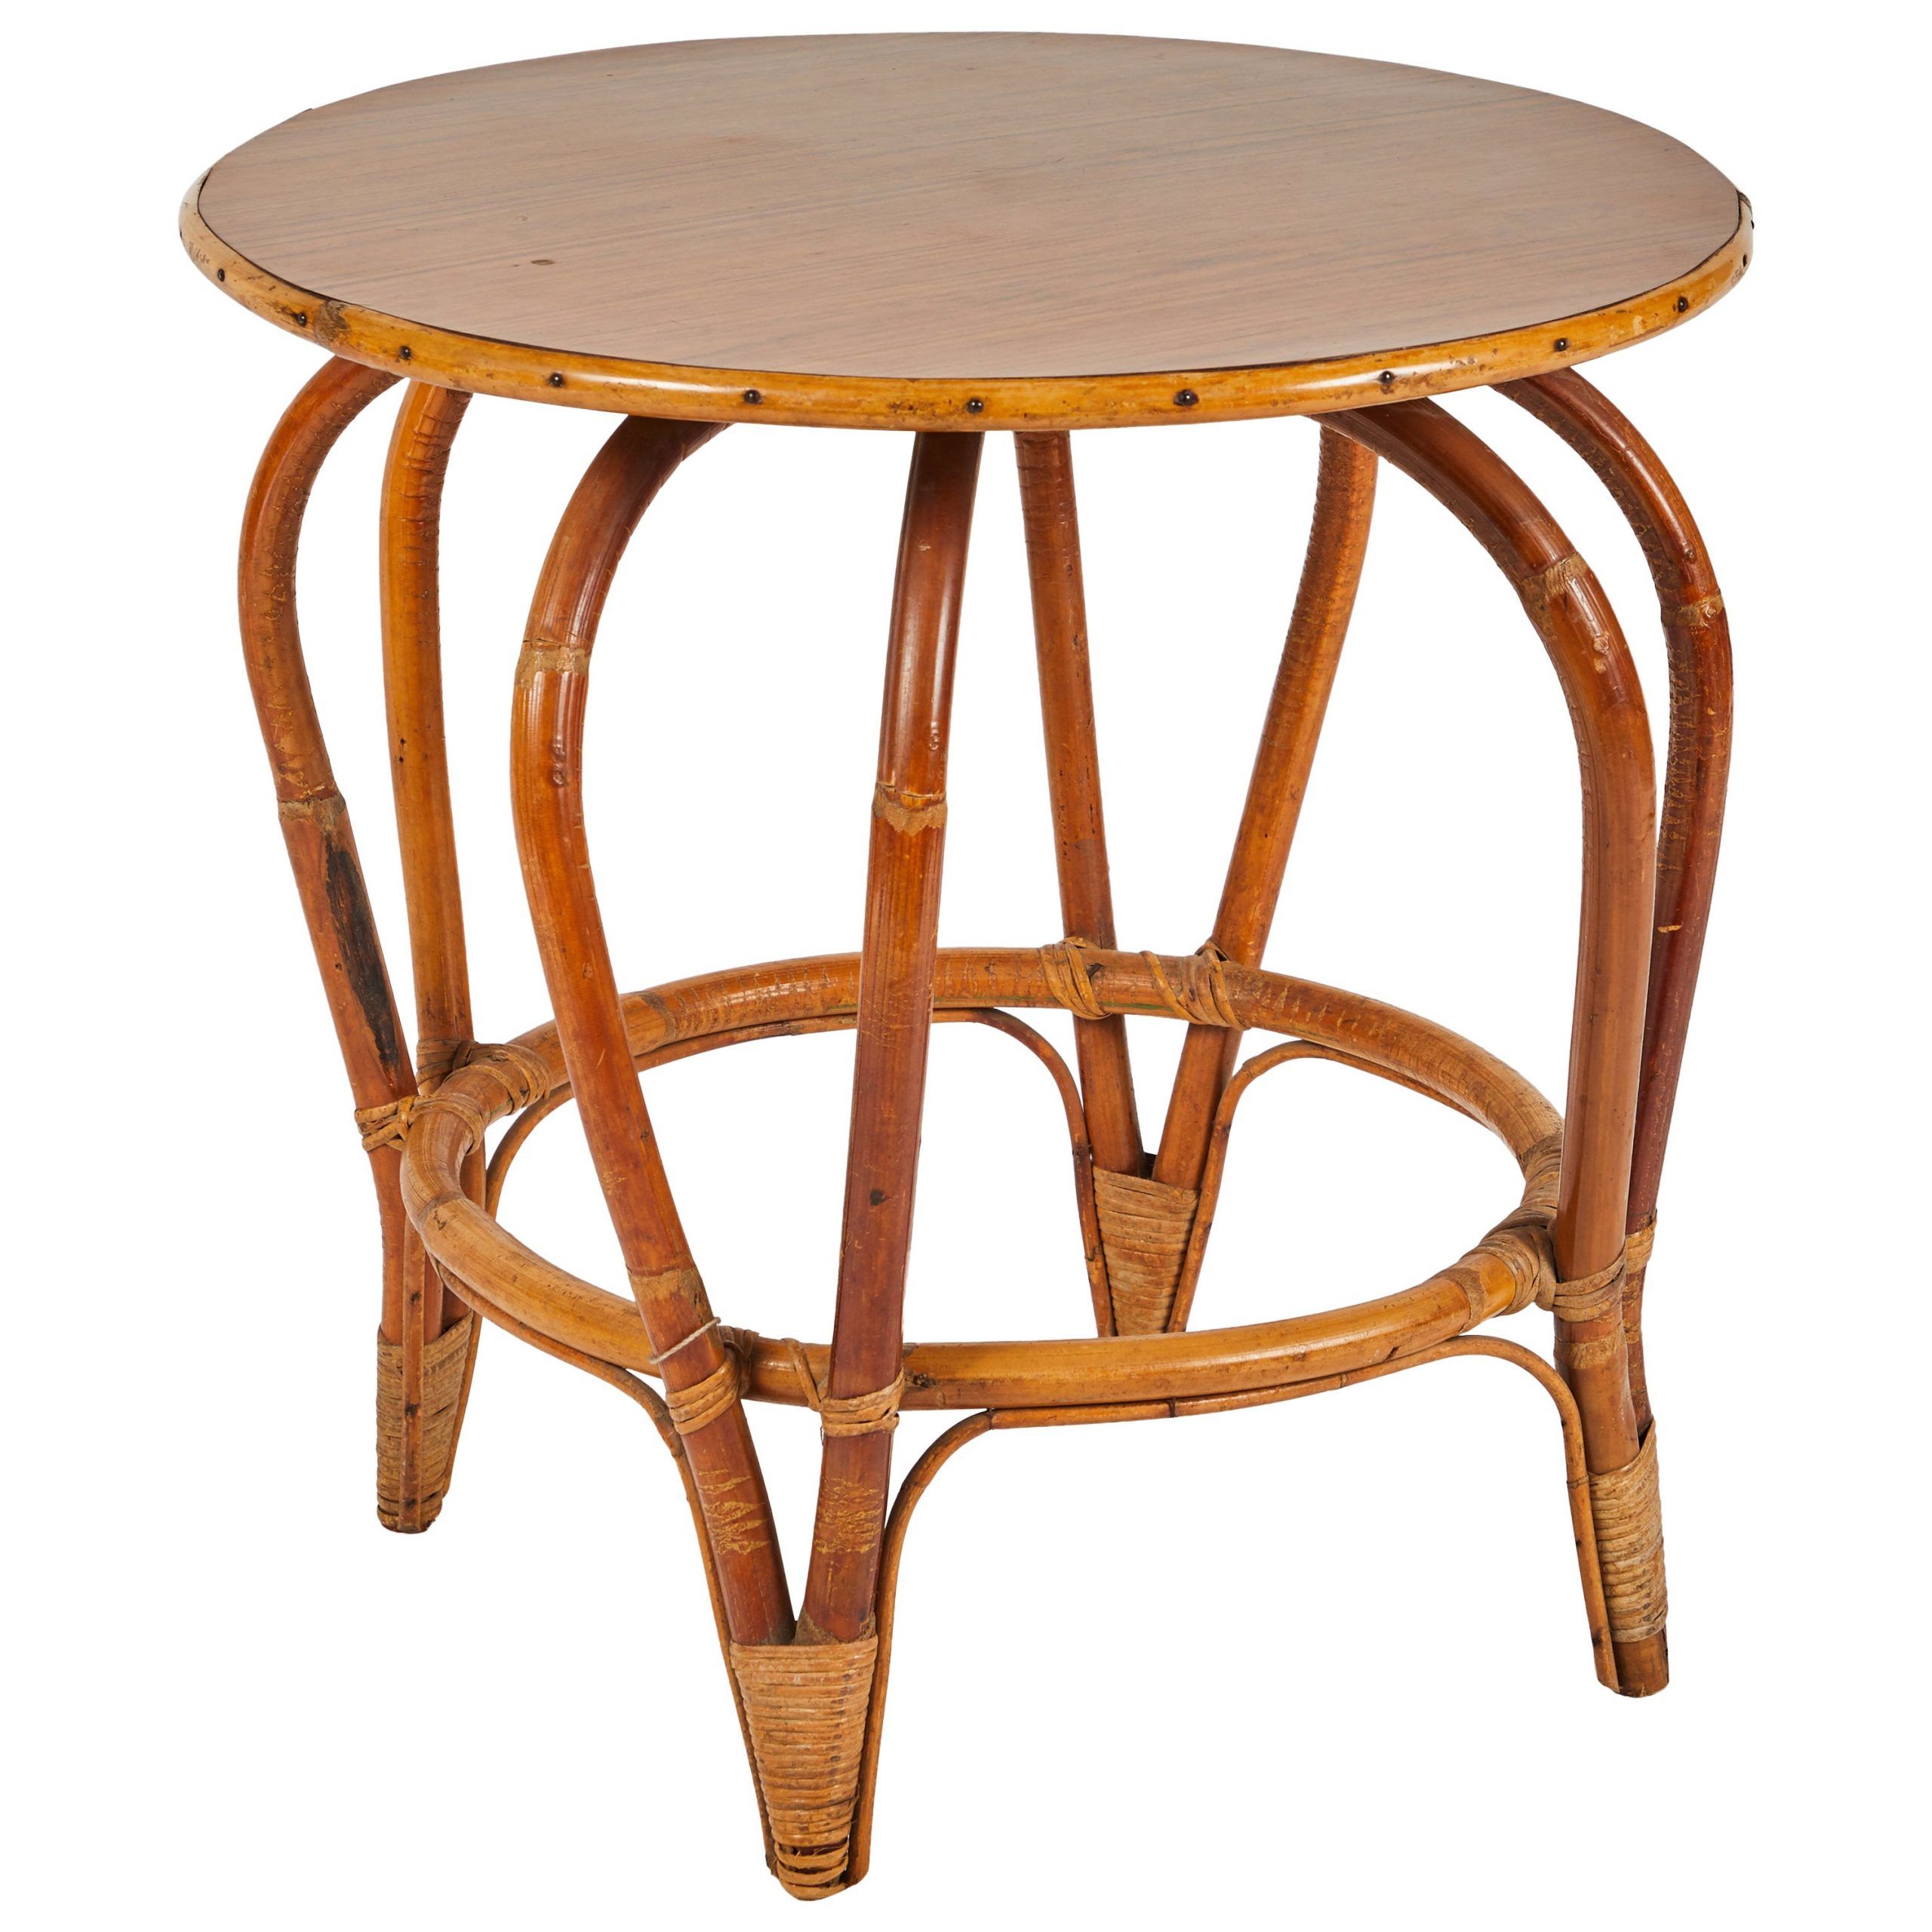 Favorite Vintage Round Rattan Drum Shape Coffee Or End Table With With Regard To Light Natural Drum Coffee Tables (View 16 of 20)